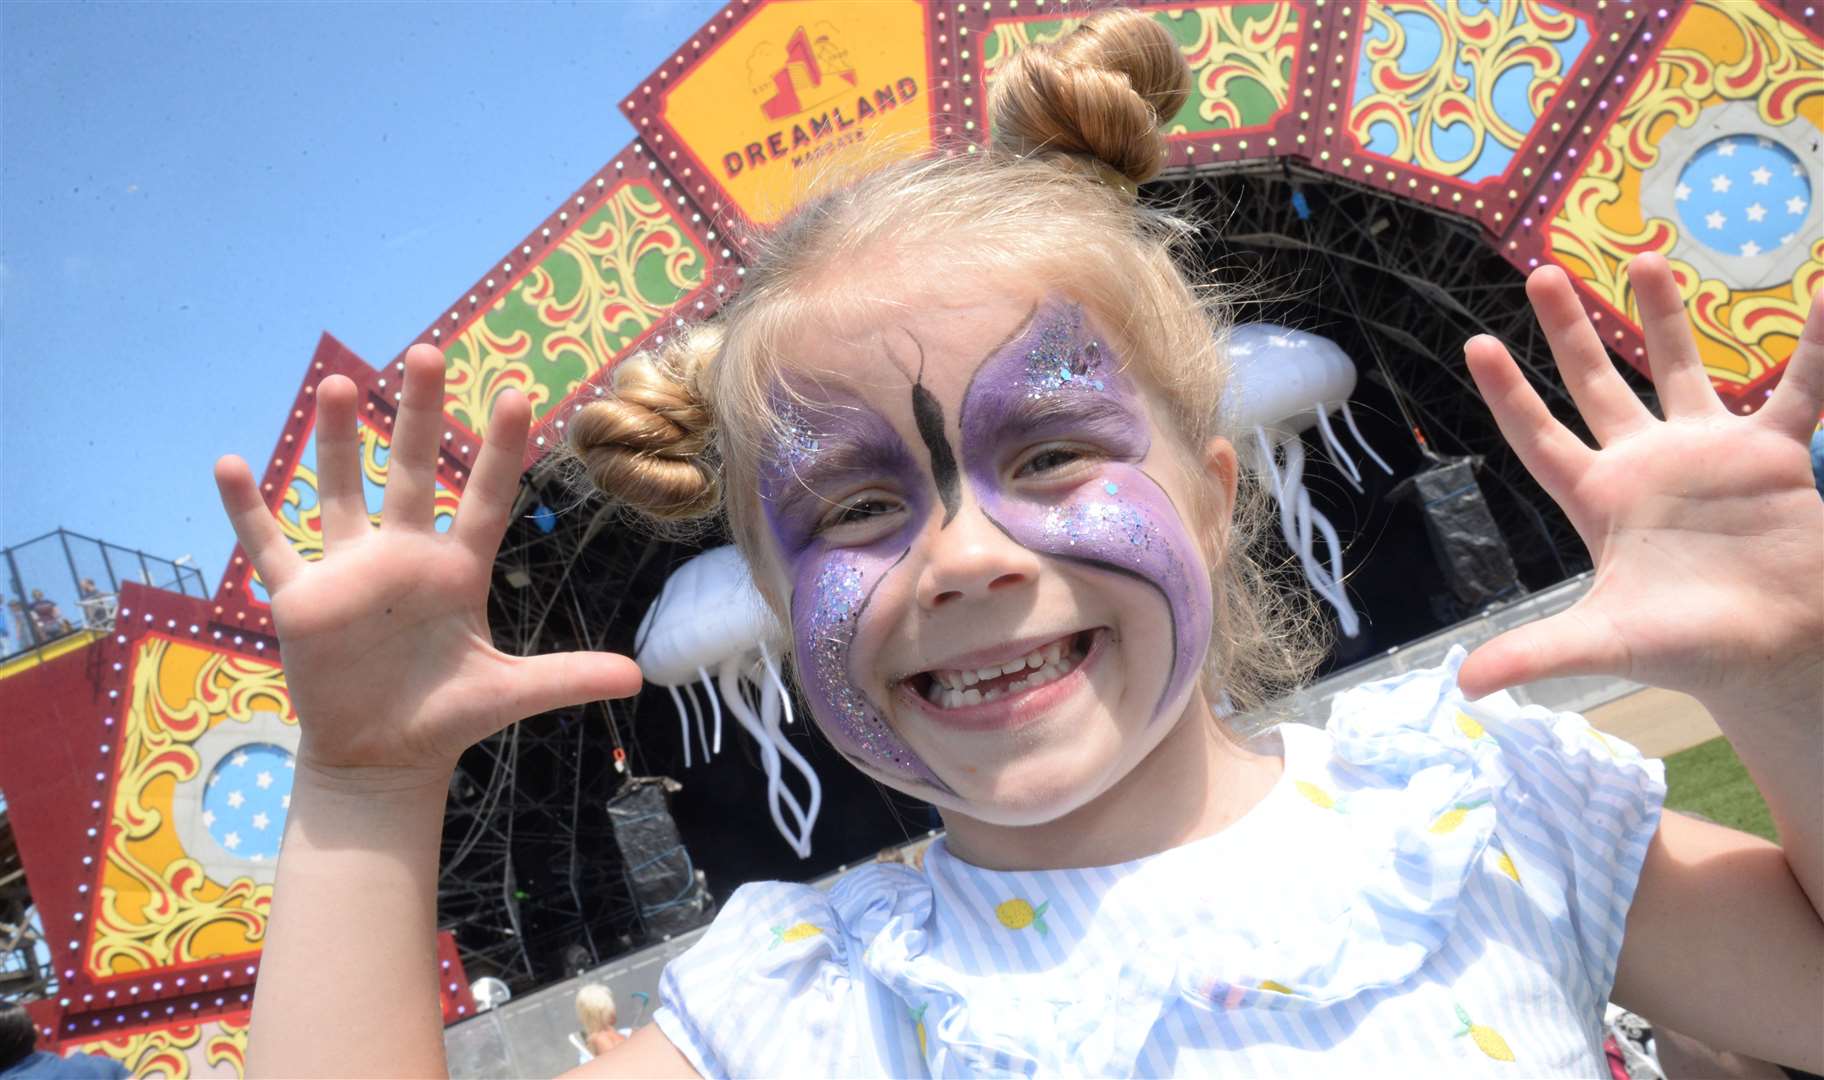 Summer fun is coming to Dreamland, Margate Picture: Chris Davey